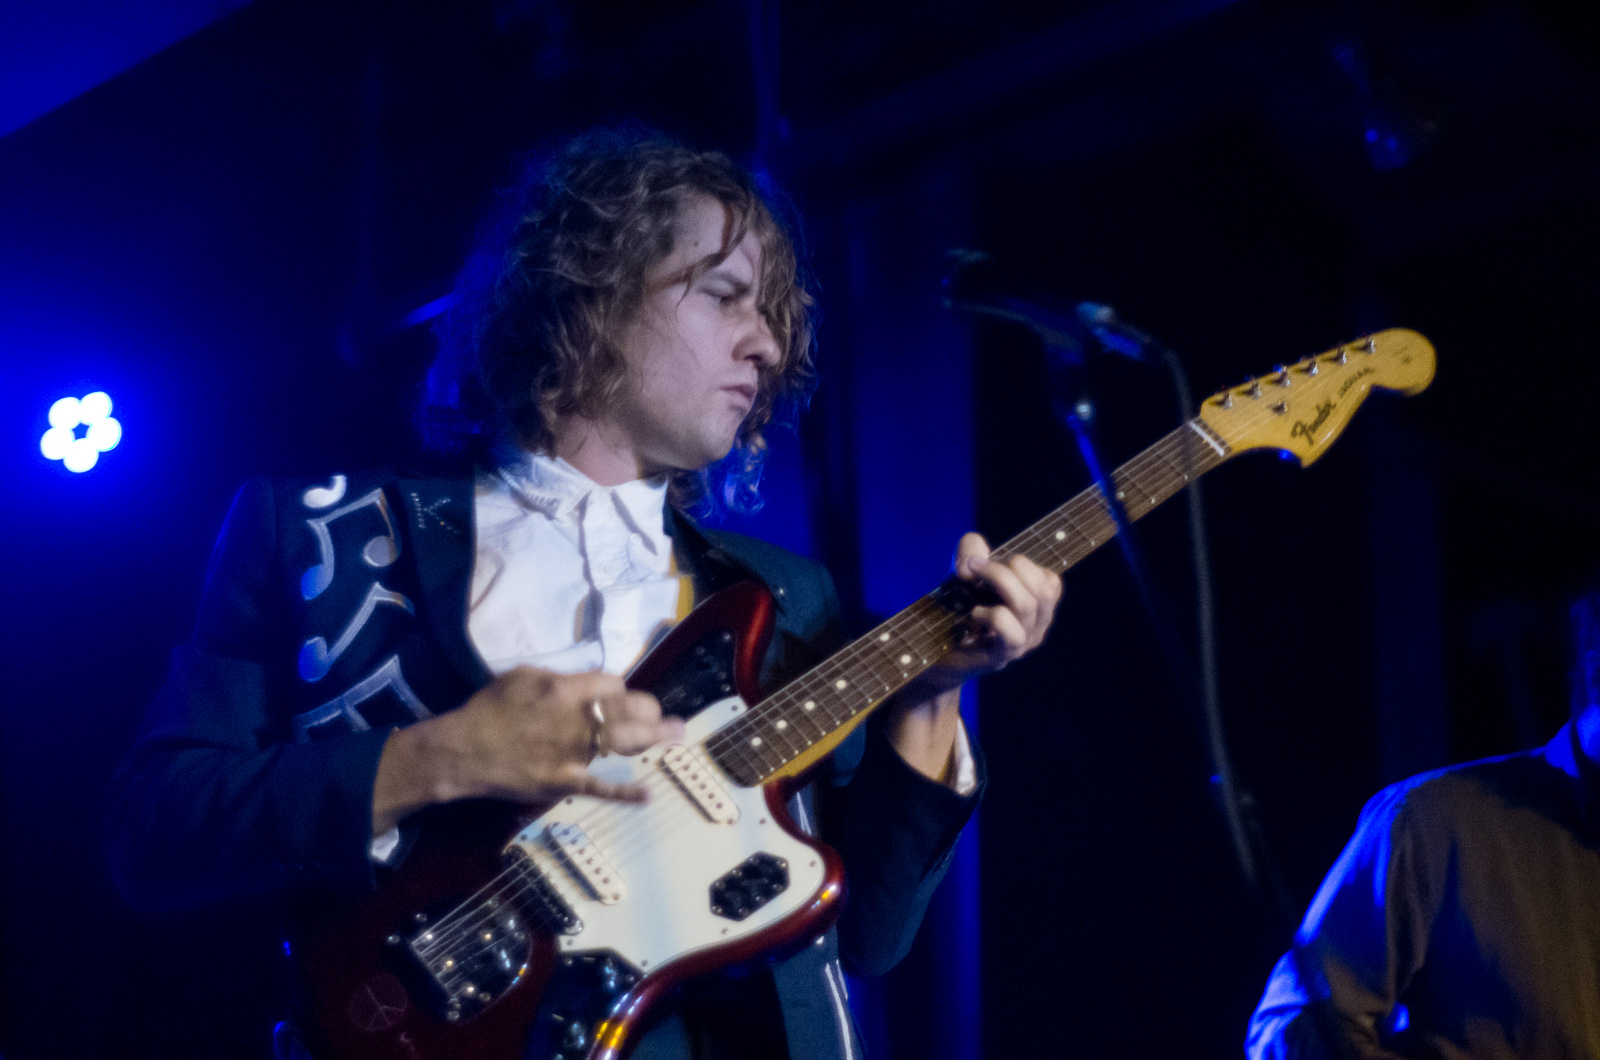 Watch a full live performance by Kevin Morby via KEXP